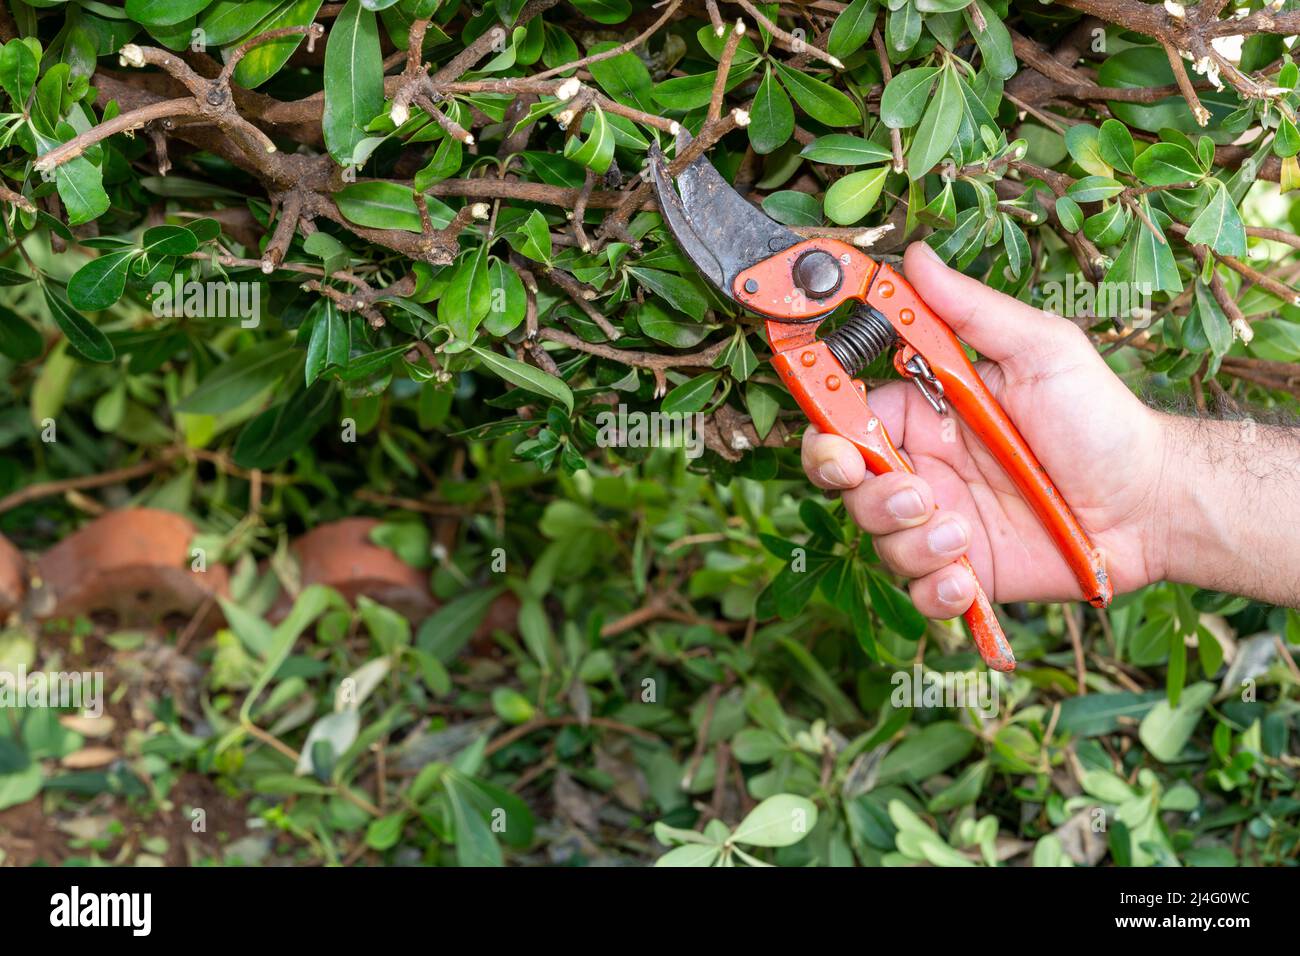 Gardener pruning bush branches in the garden. Trim the branches of an overgrown hedge plant with the orange secateurs. Spring, agriculture, gardening. Stock Photo